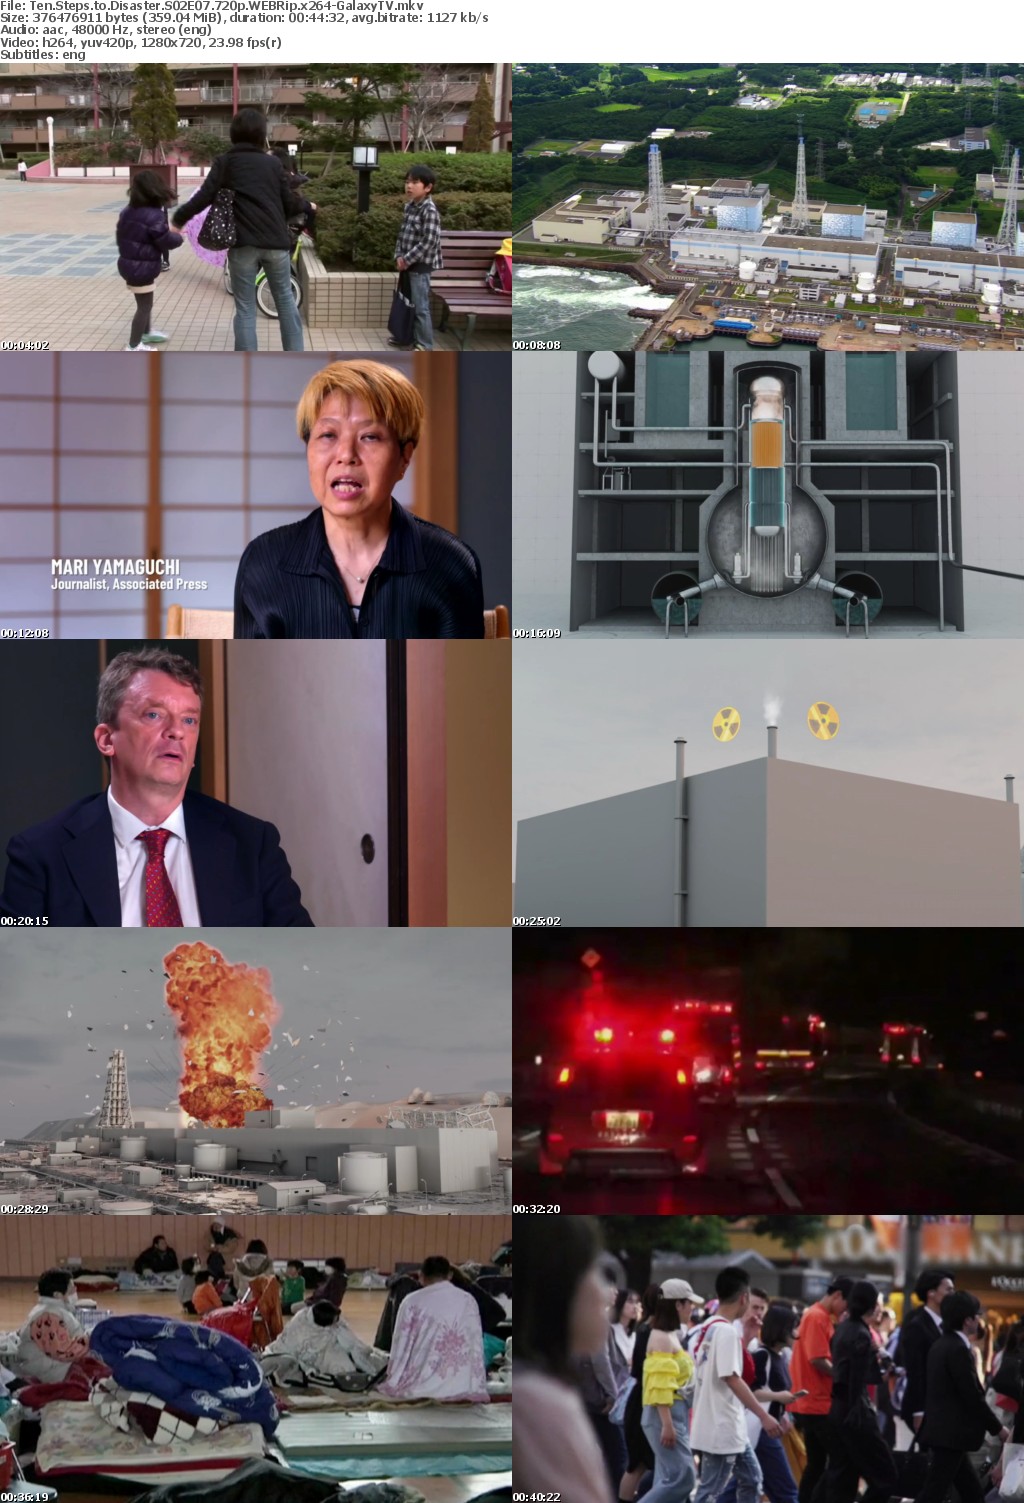 Ten Steps to Disaster S02 COMPLETE 720p WEBRip x264-GalaxyTV